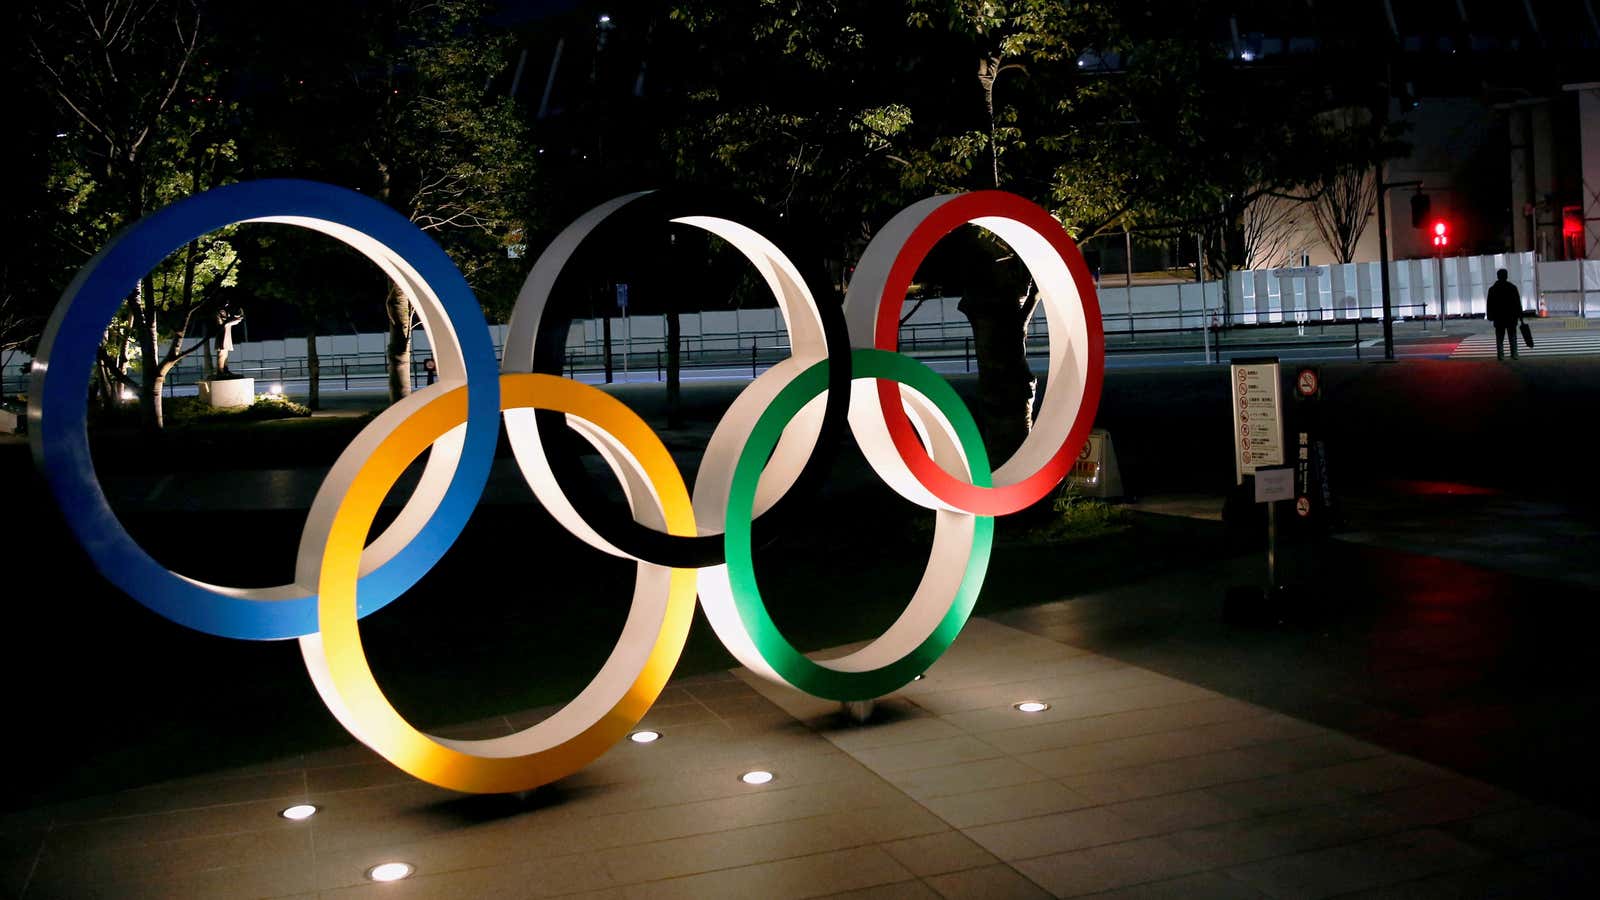 The Olympic rings are illuminated in front of the National Stadium in Tokyo, Japan January 22, 2021.